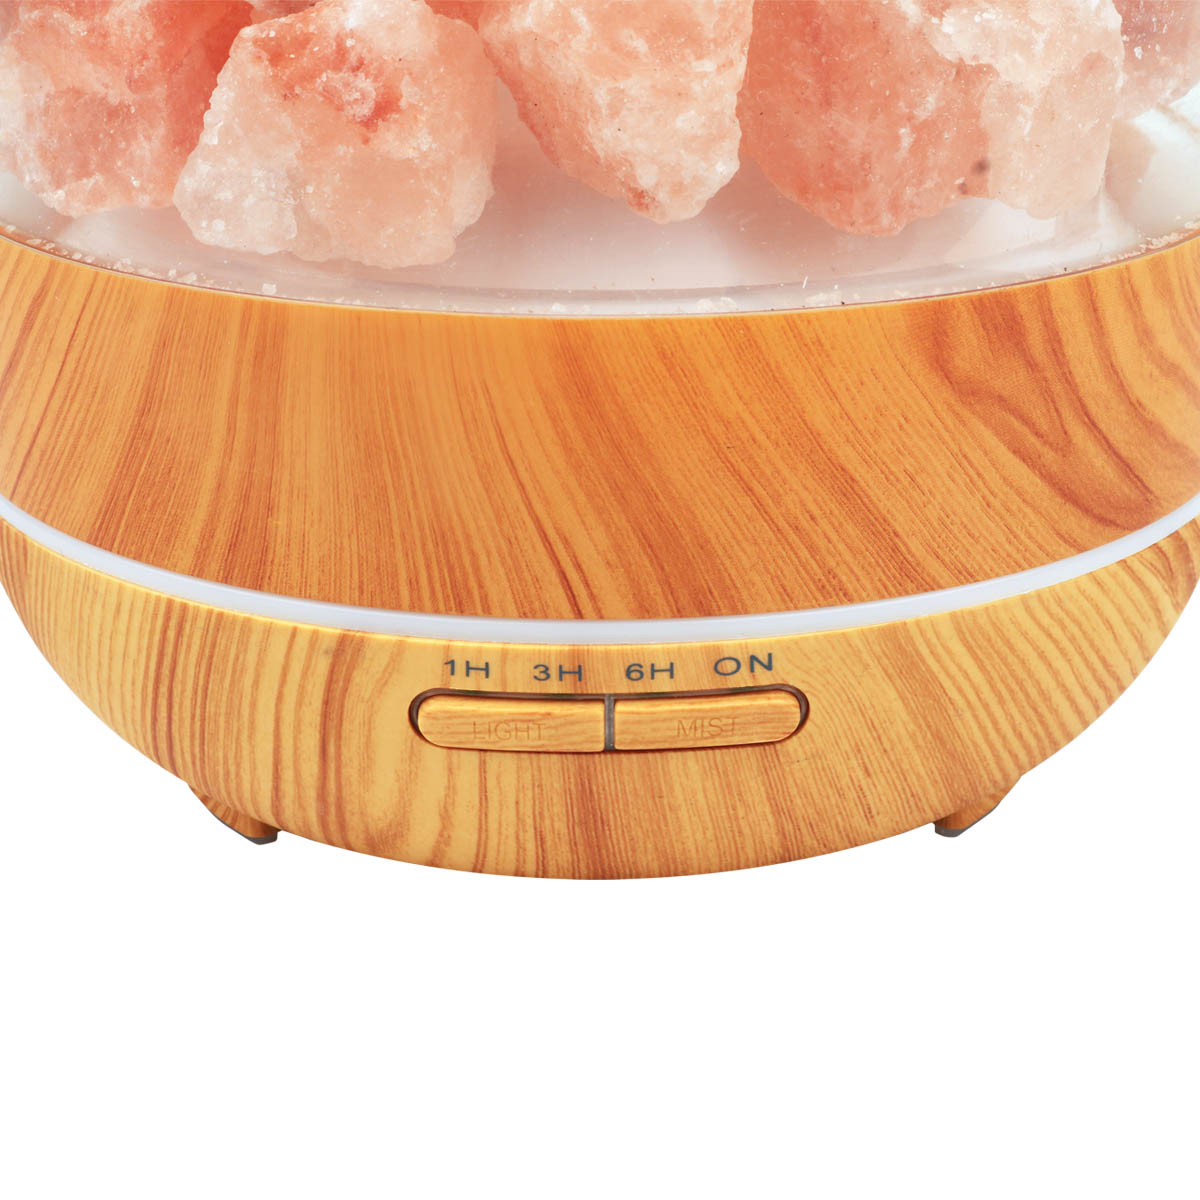 Wholesale Salt of the Earth Essential Oil Diffuser